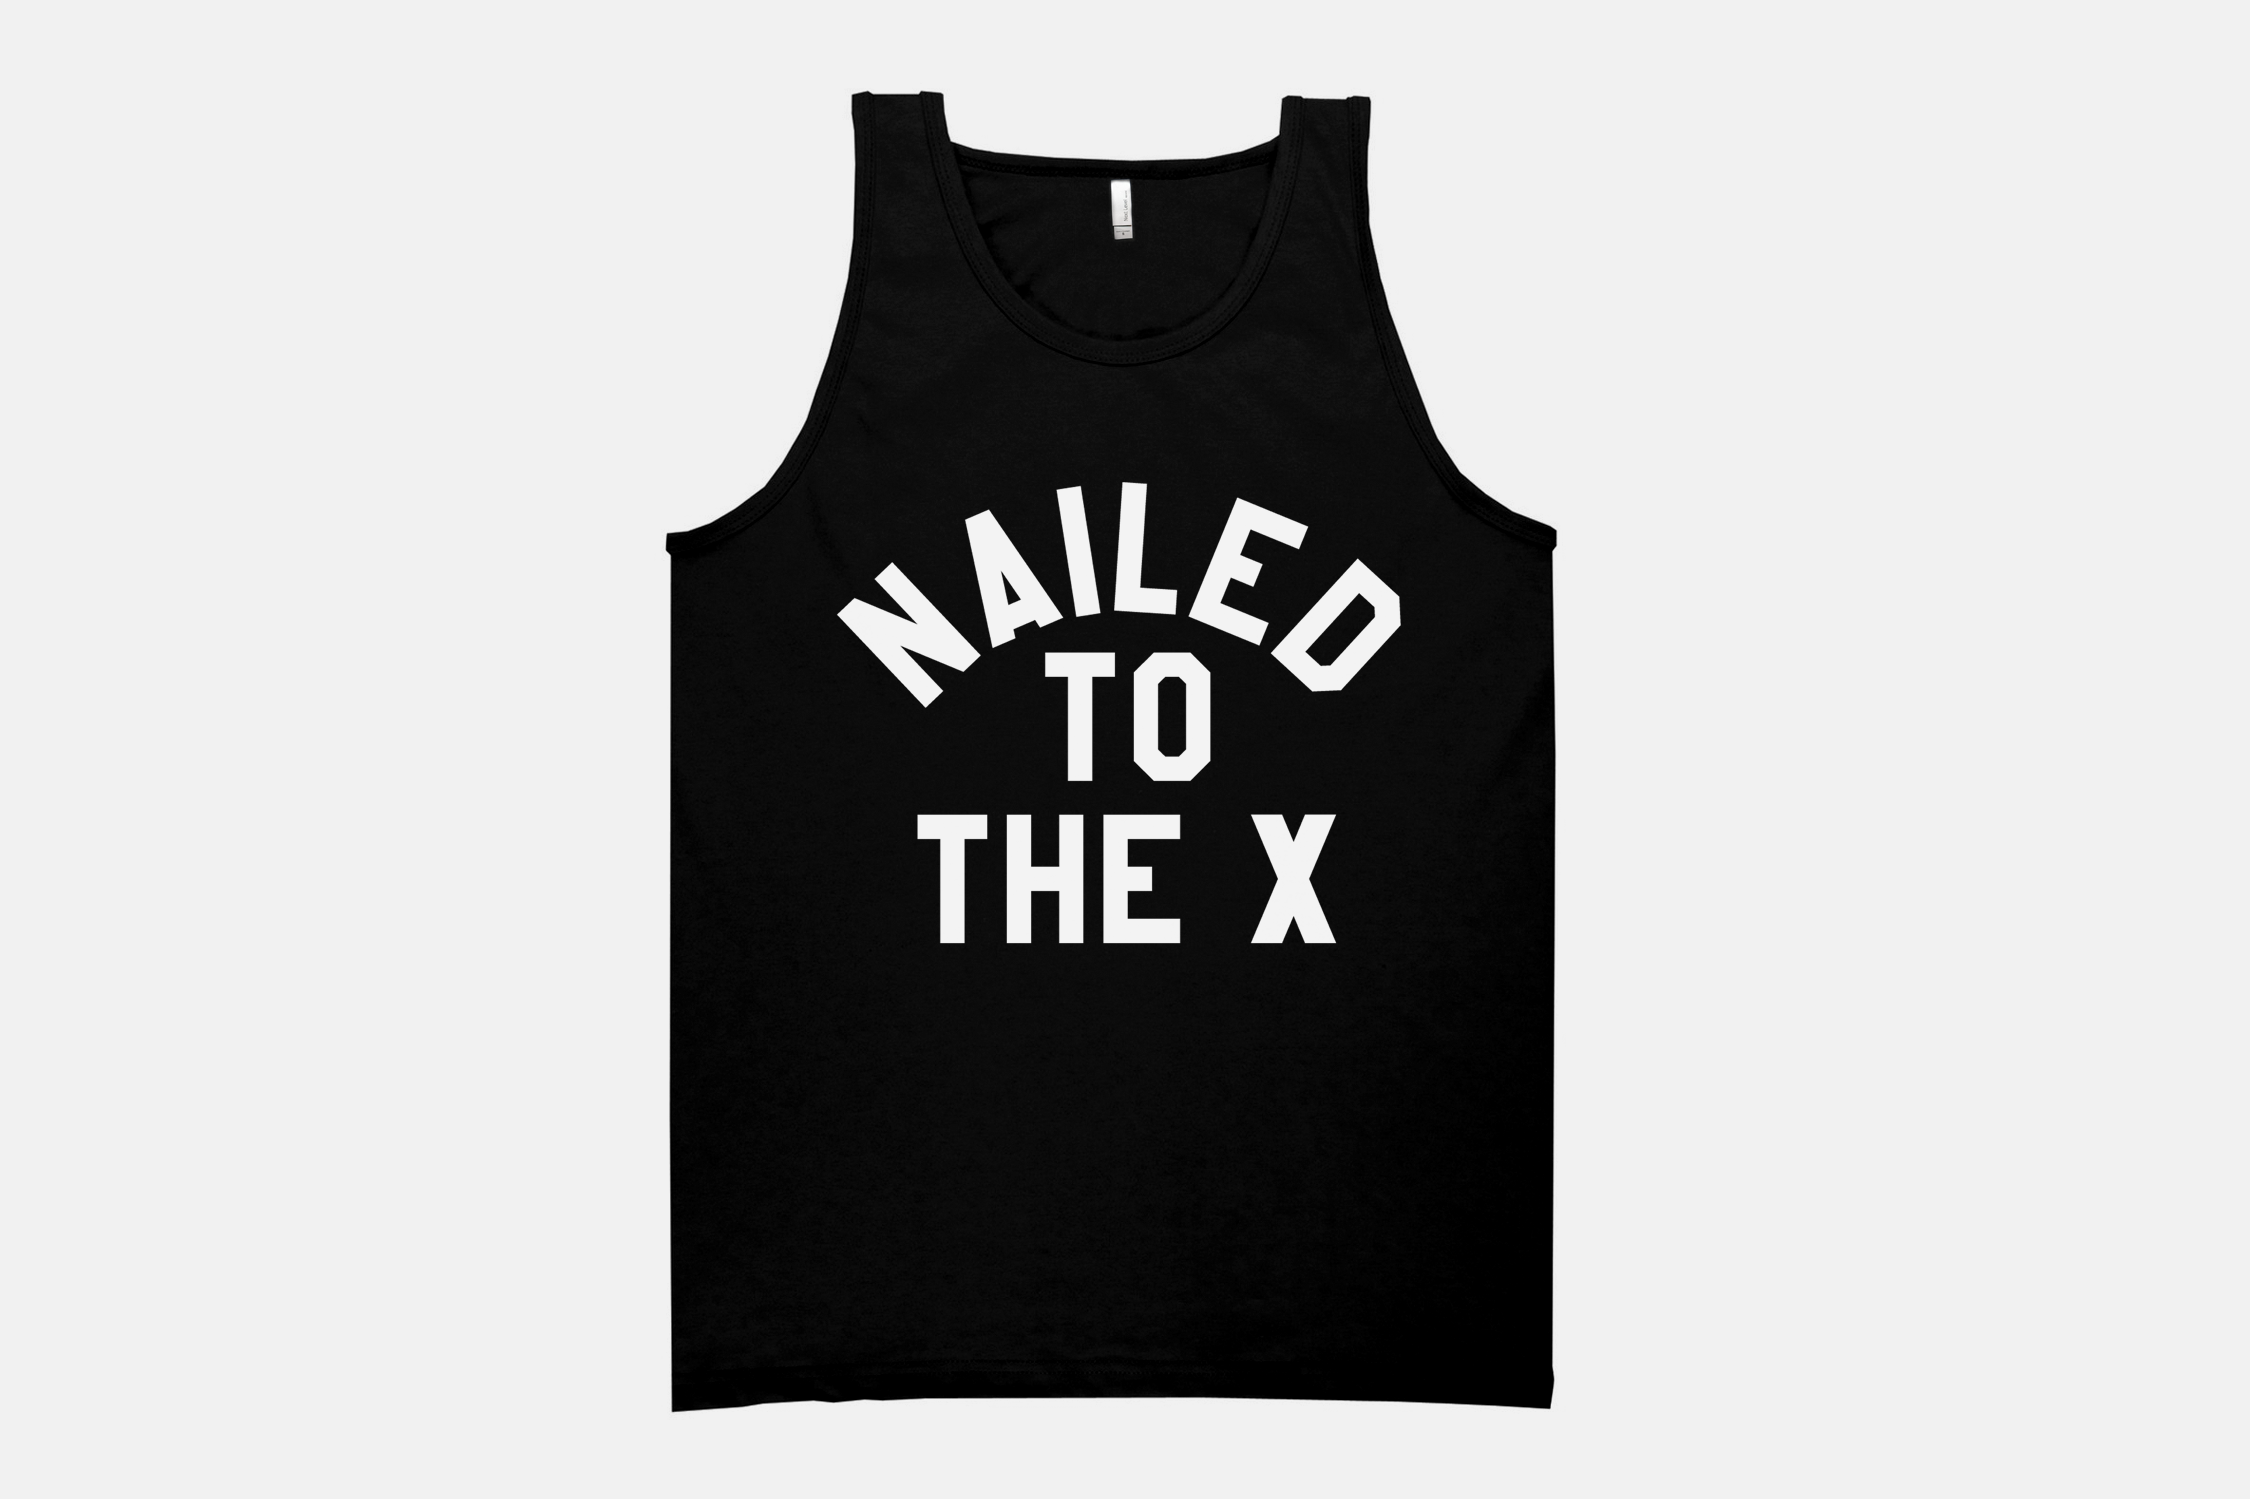 Nailed to the X Straight Edge tank top by STRAIGHTEDGEWORLDWIDE